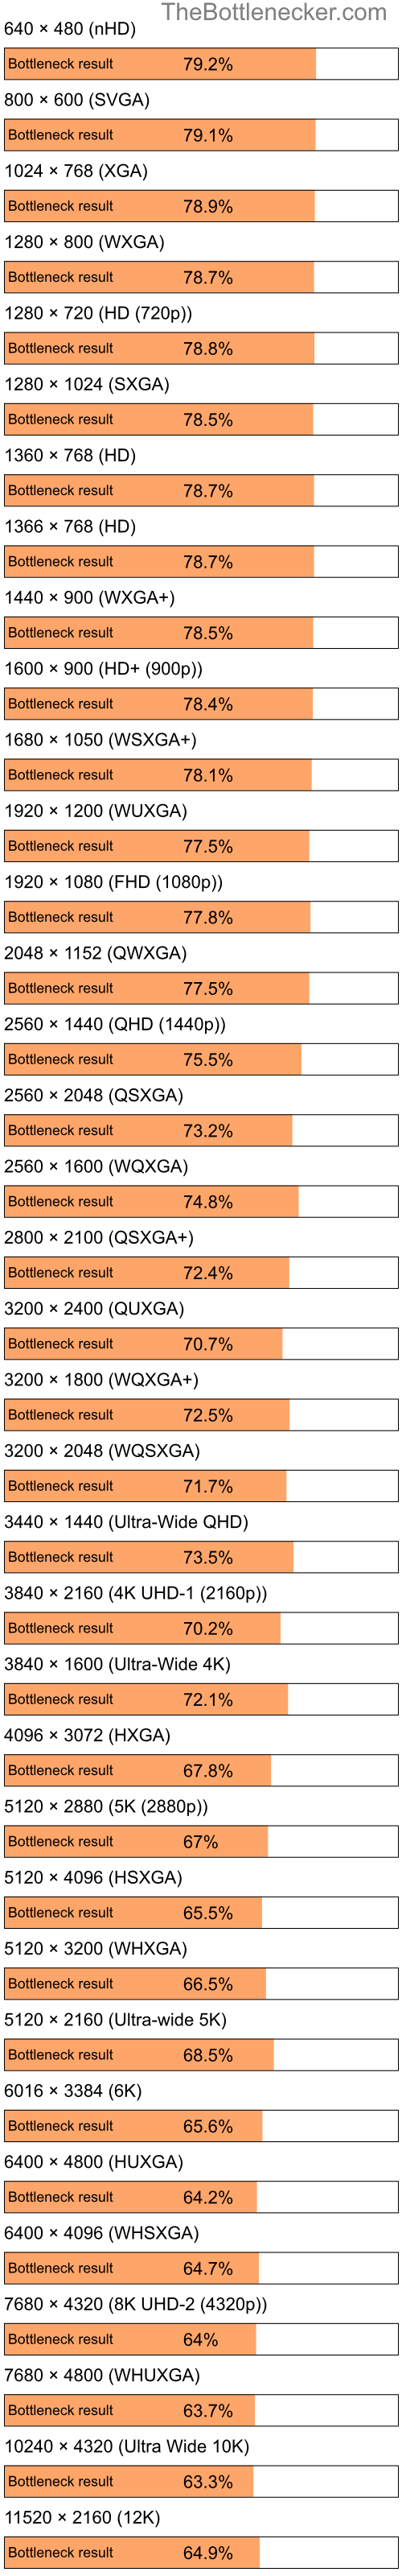 Bottleneck results by resolution for AMD Sempron 3000+ and NVIDIA GeForce RTX 2060 in Graphic Card Intense Tasks